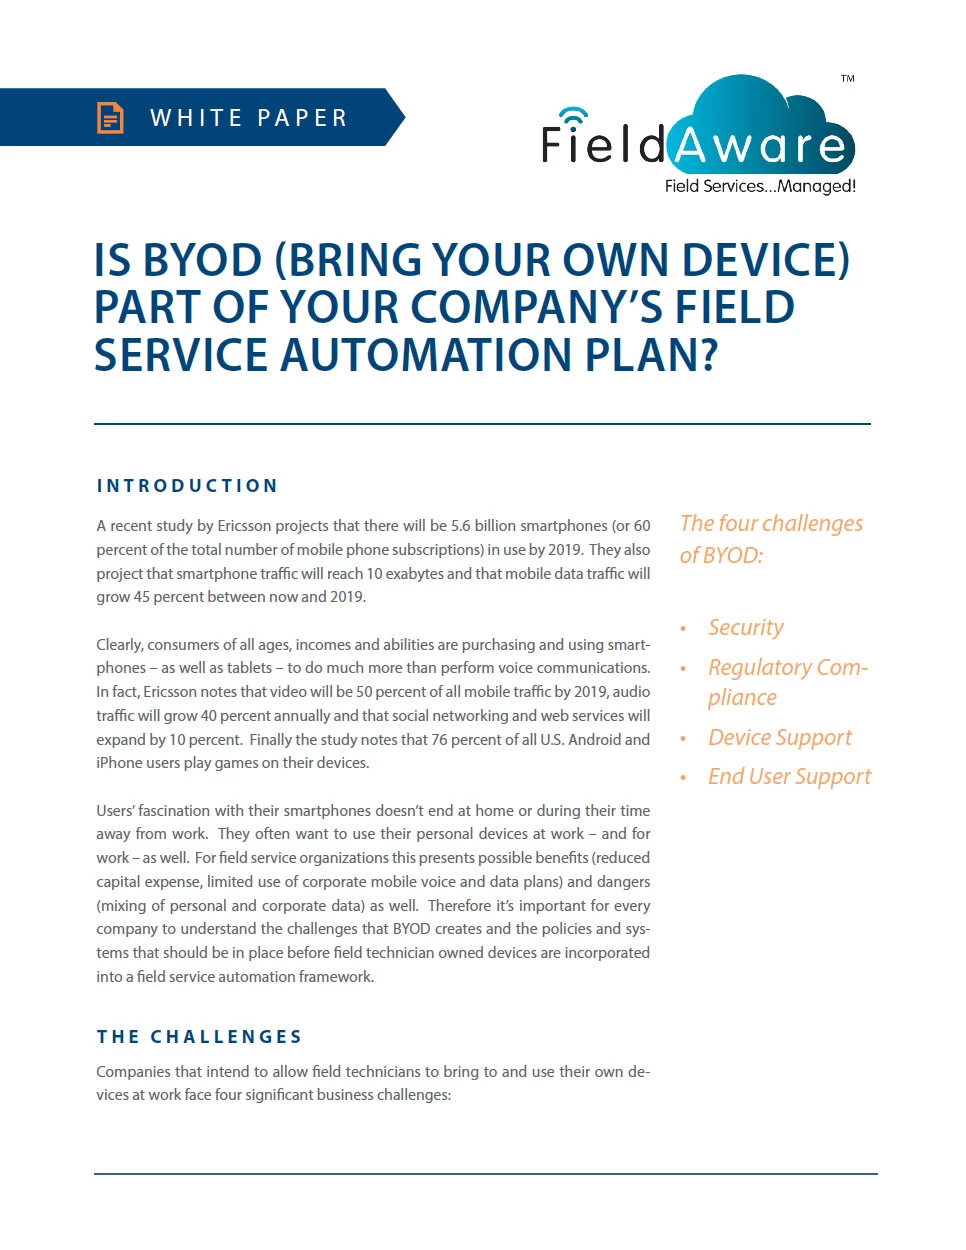 Is BYOD (Bring Your Own Device) Part of Your Company's Field Service Automation Plan? White Paper